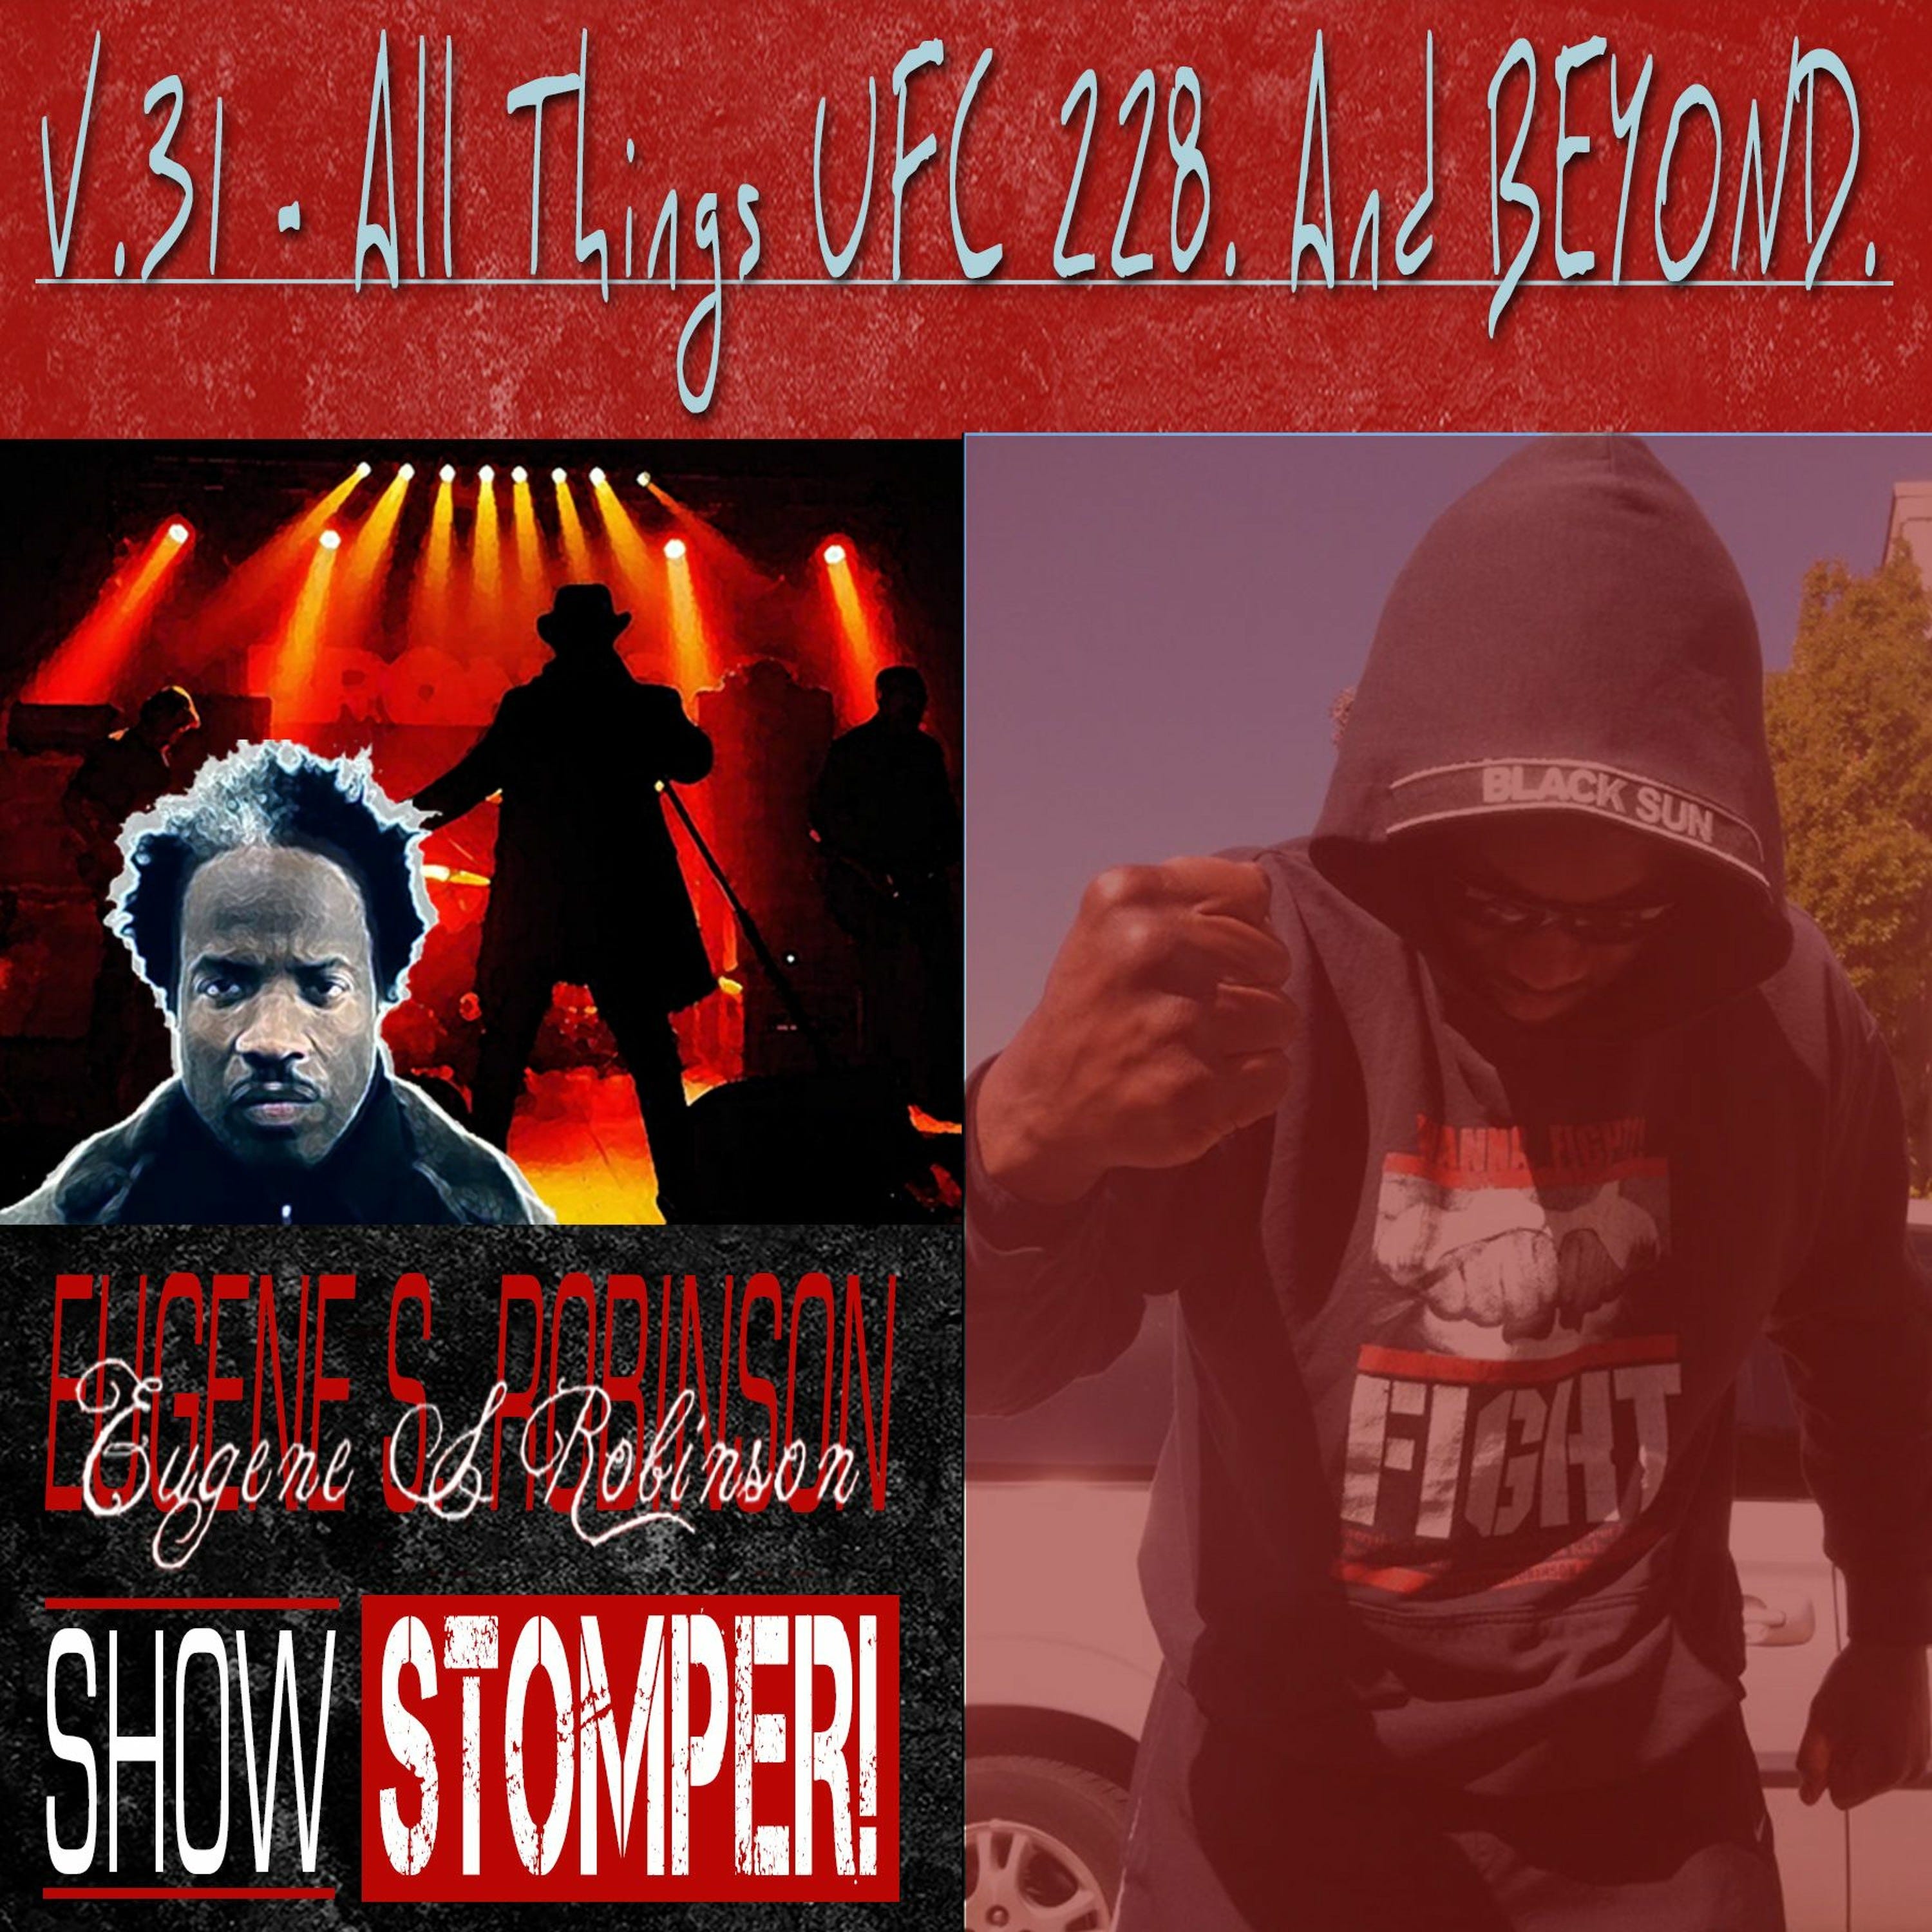 The Eugene S. Robinson Show Stomper! V.31 - All Things UFC 228. And BEYOND (1)